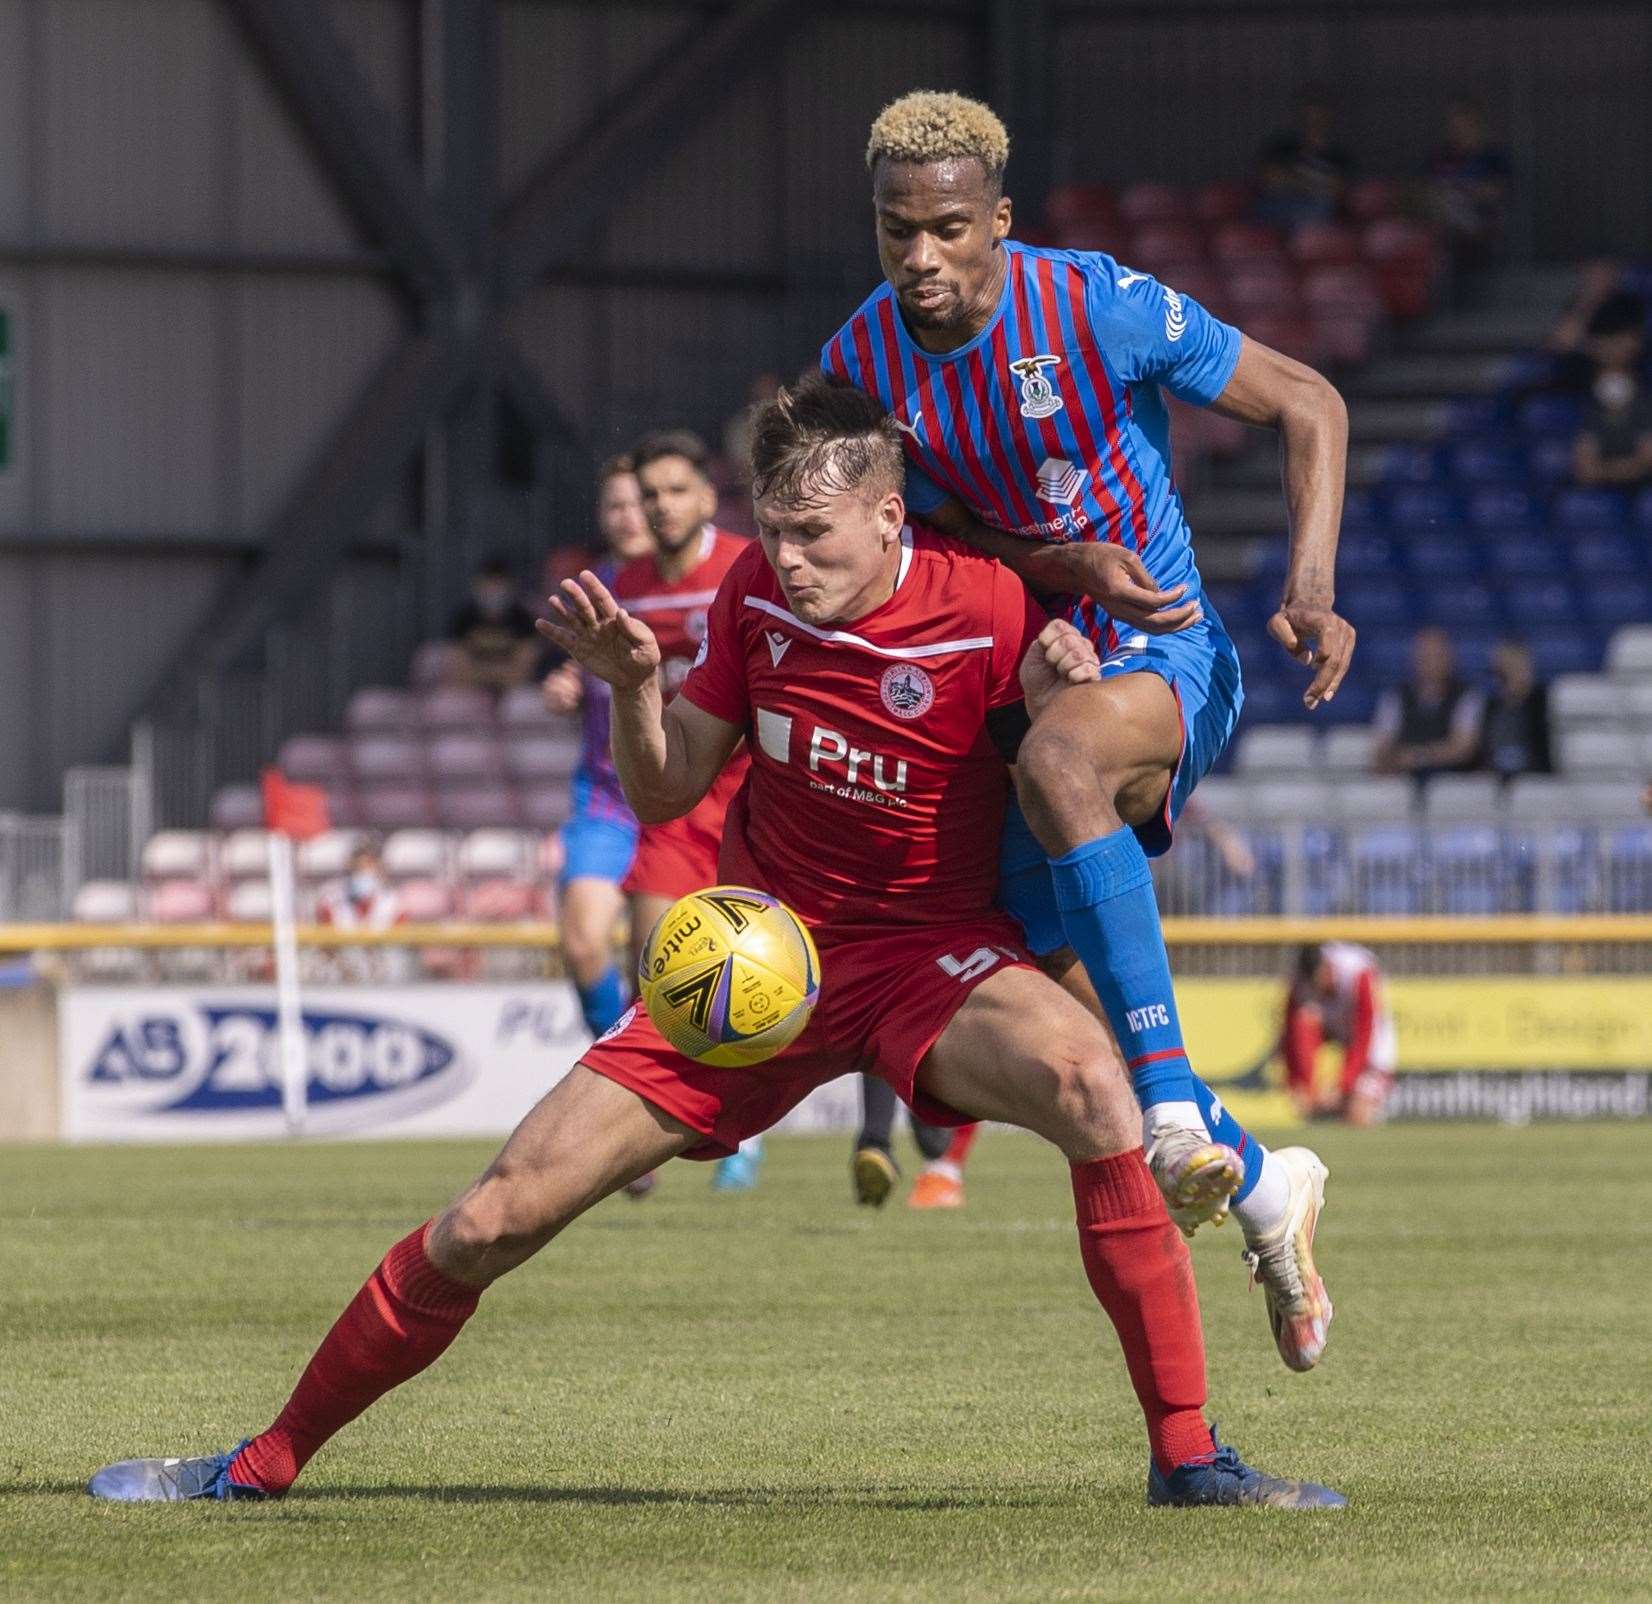 Picture - Ken Macpherson, Inverness. Inverness CT(2) v Stirling Albion(2). 17.07.21. Stirling Albion win 3-2 on penalties. ICT’s Manny Duku tries to get past Stirling's Jordan McGregor before being taken down on the edge of the box.